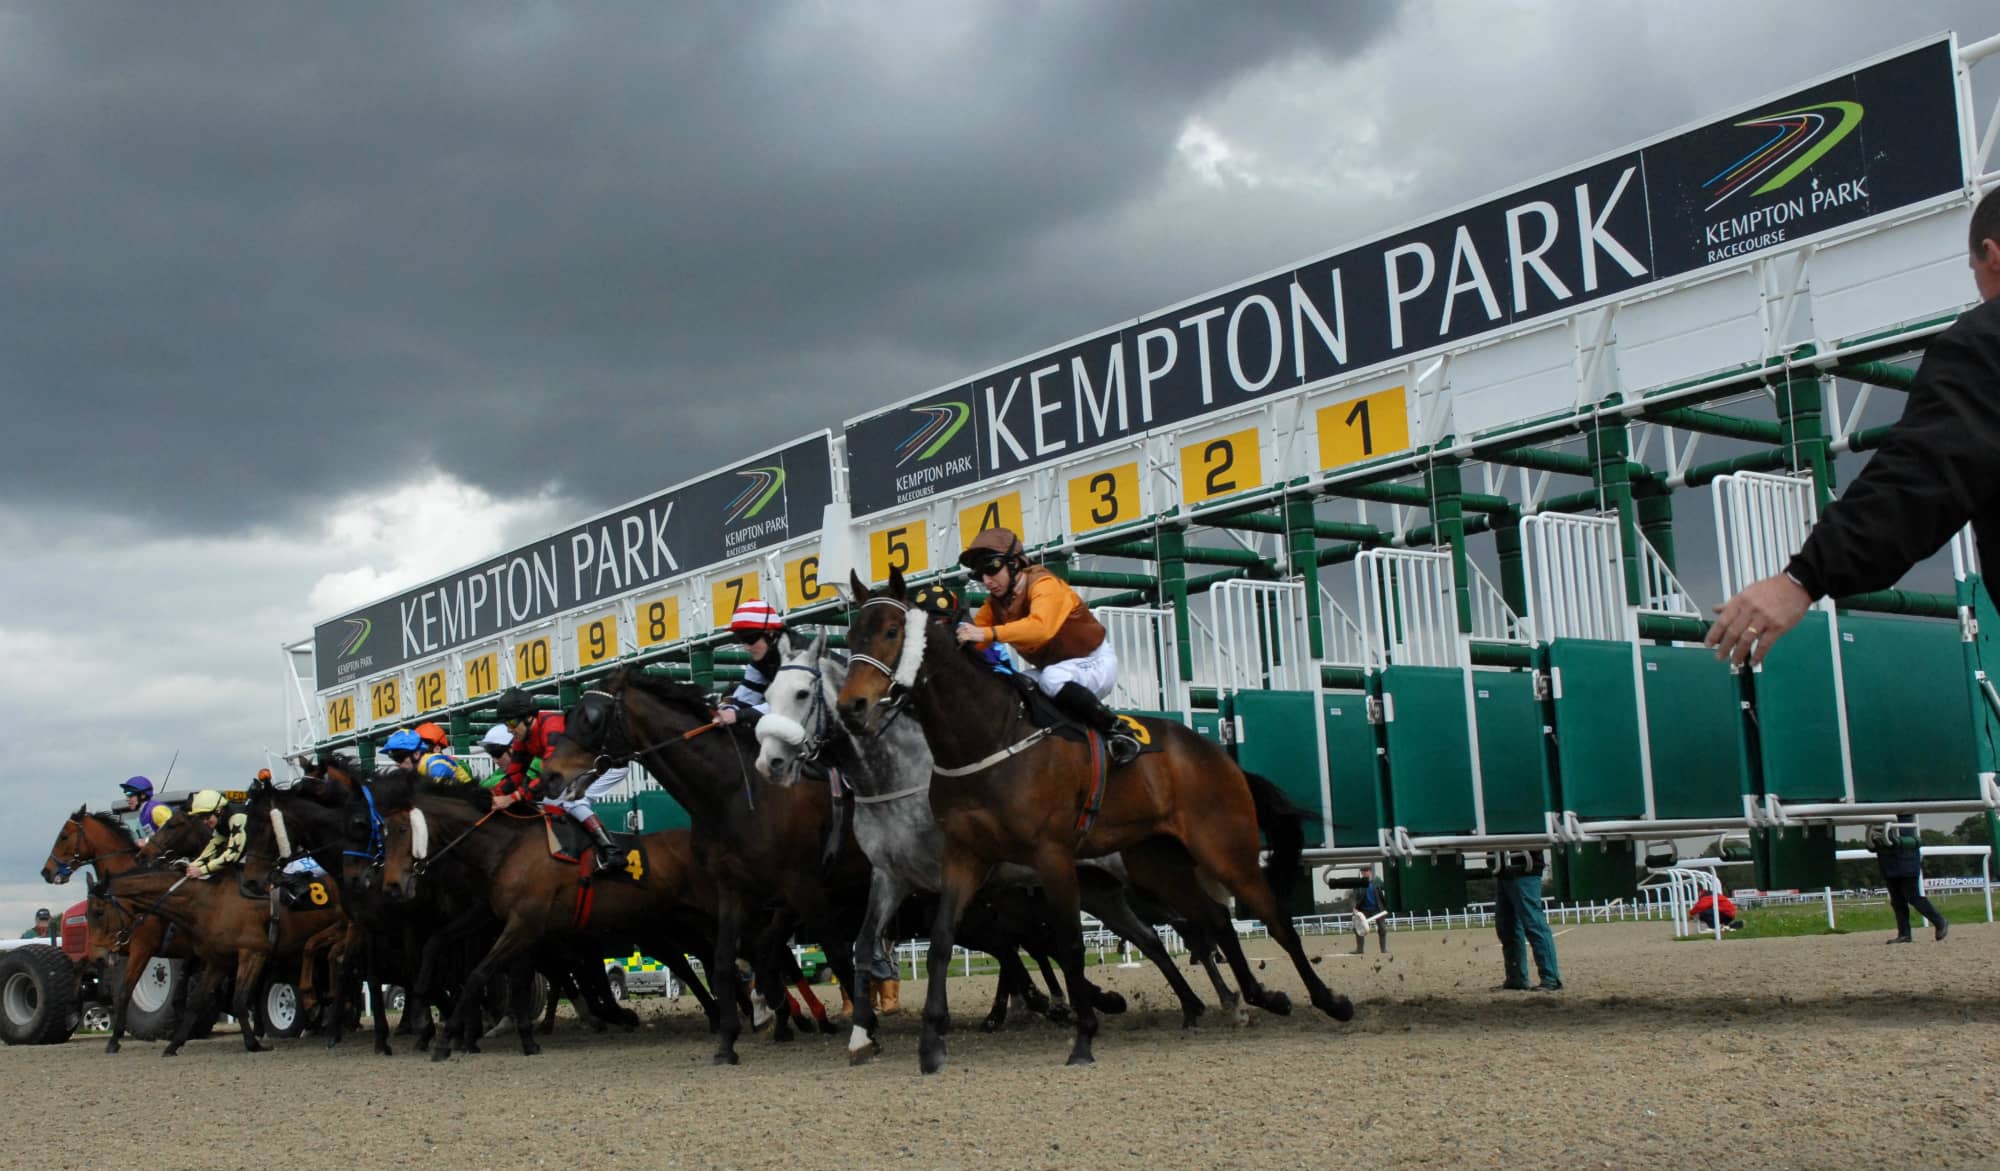 Forward Plan emerges as the top choice for bettors at Kempton